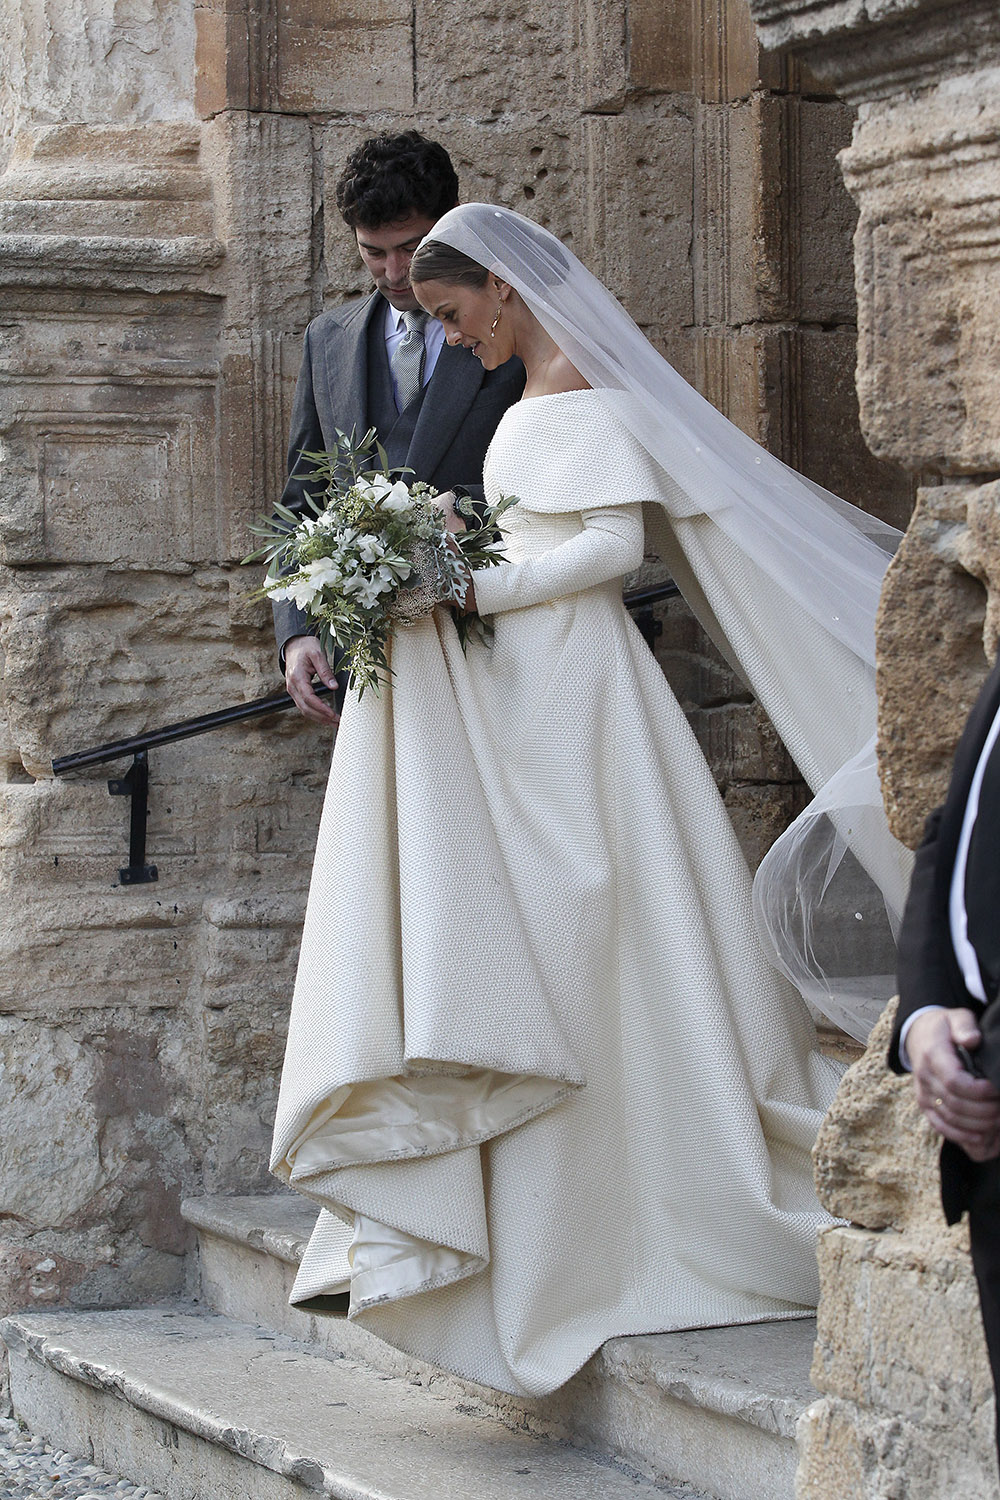 Lady Charlotte Wellesley and Alejandro Santo Domingo are seen outside of the church after marrying in Granada, Spain.